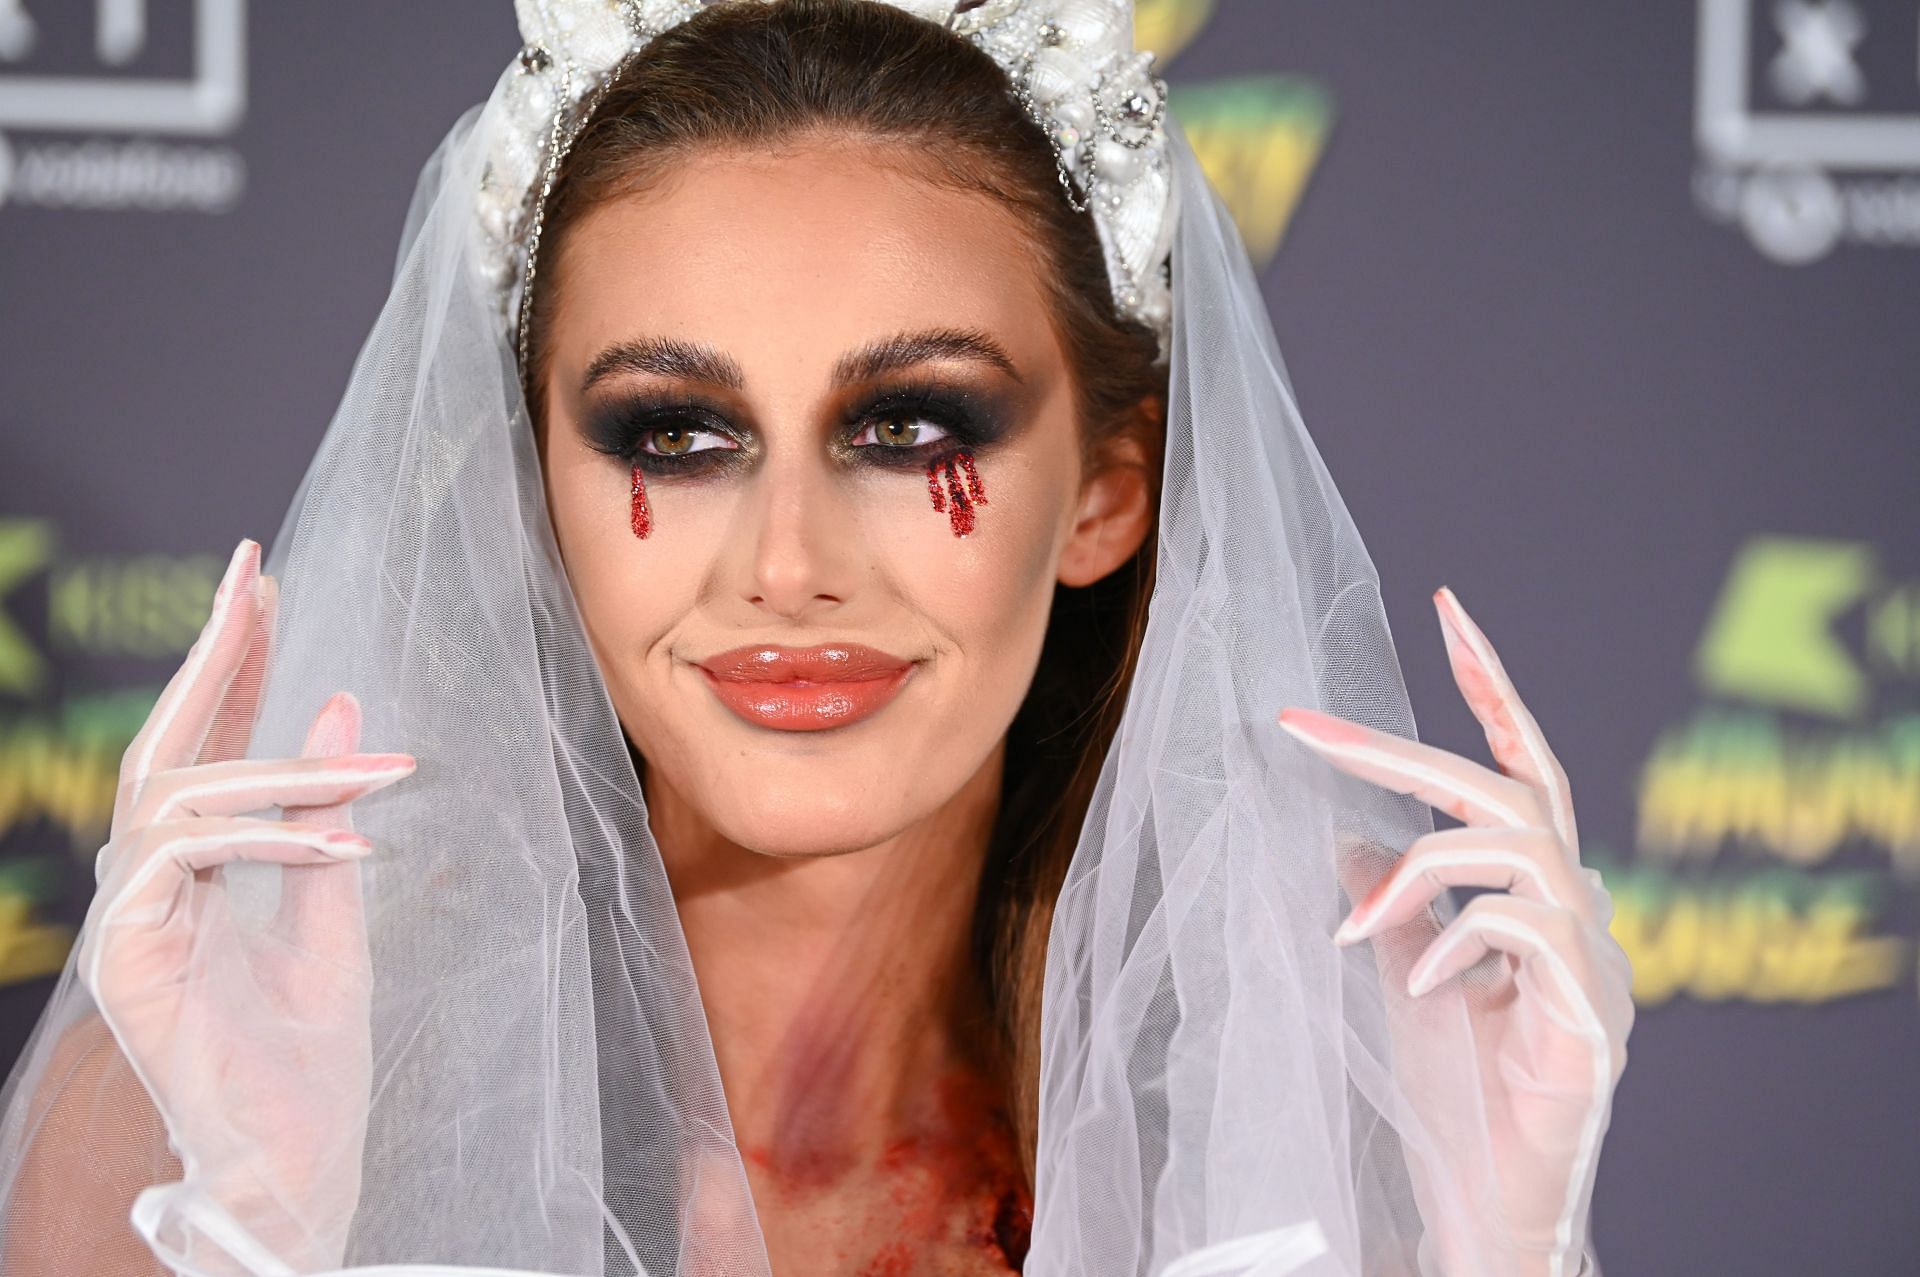 Chloe Veitch at the KISS Haunted House Party (Image via Getty Images)